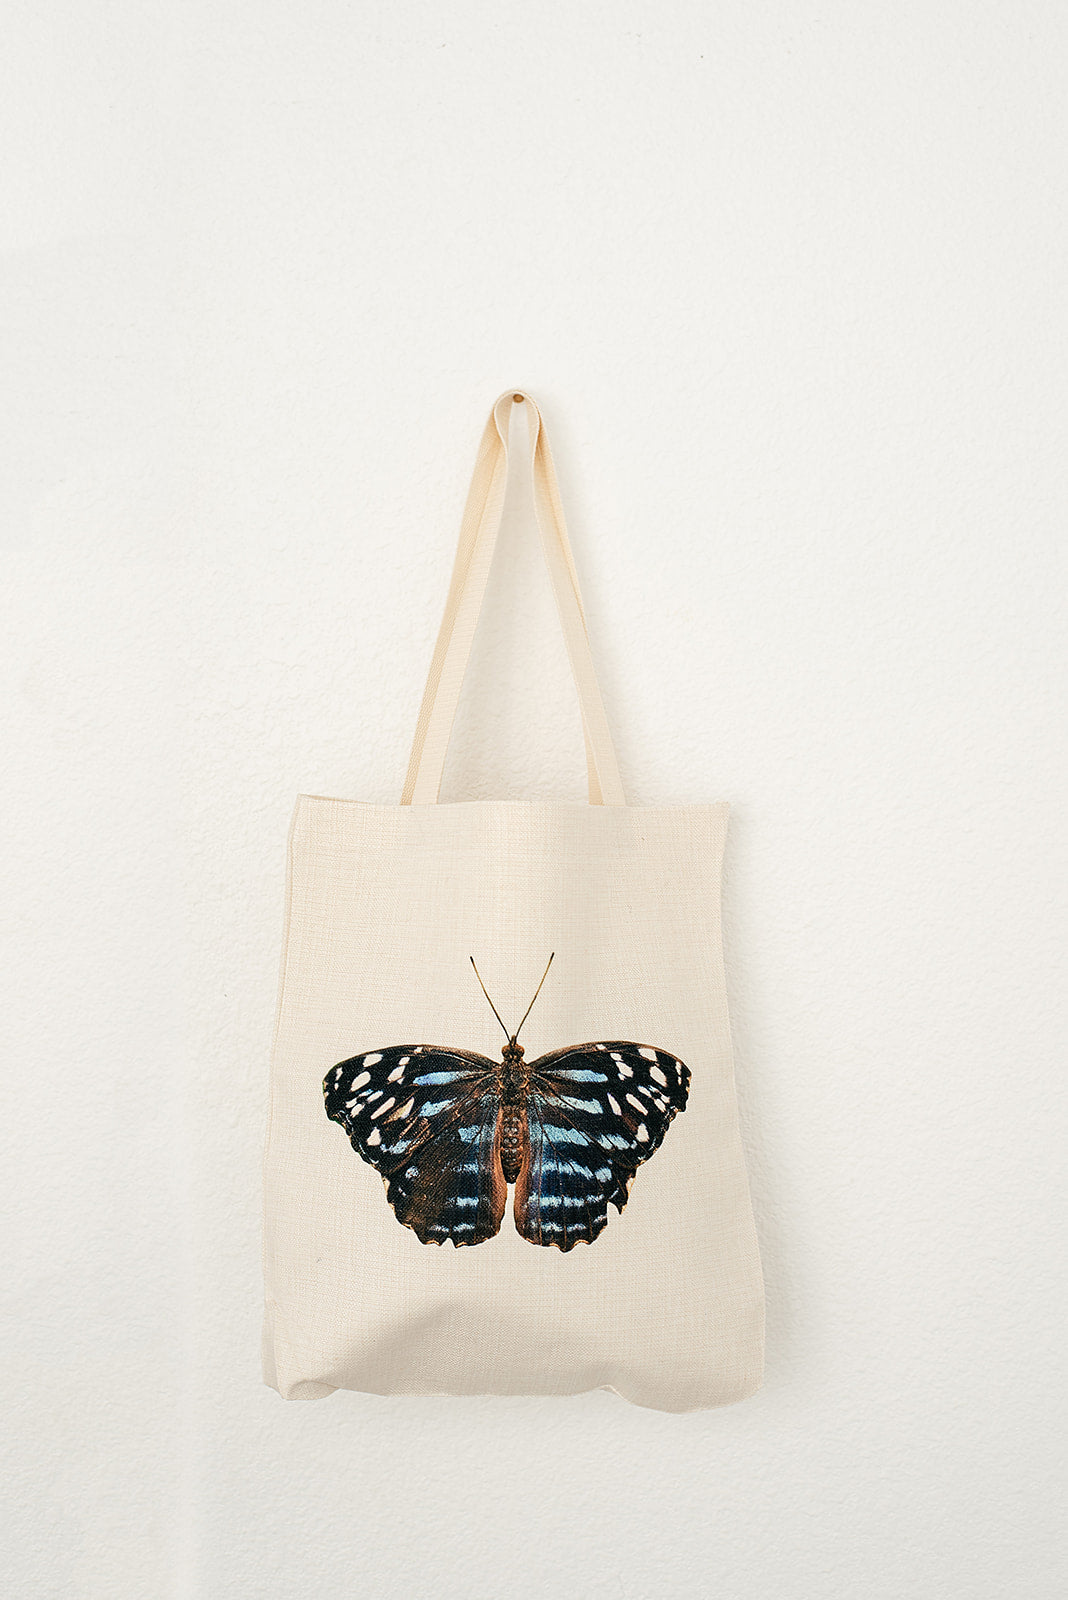 Blue Butterfly Tote, College Student Gift, Mother's Day Gift, Easter Gift